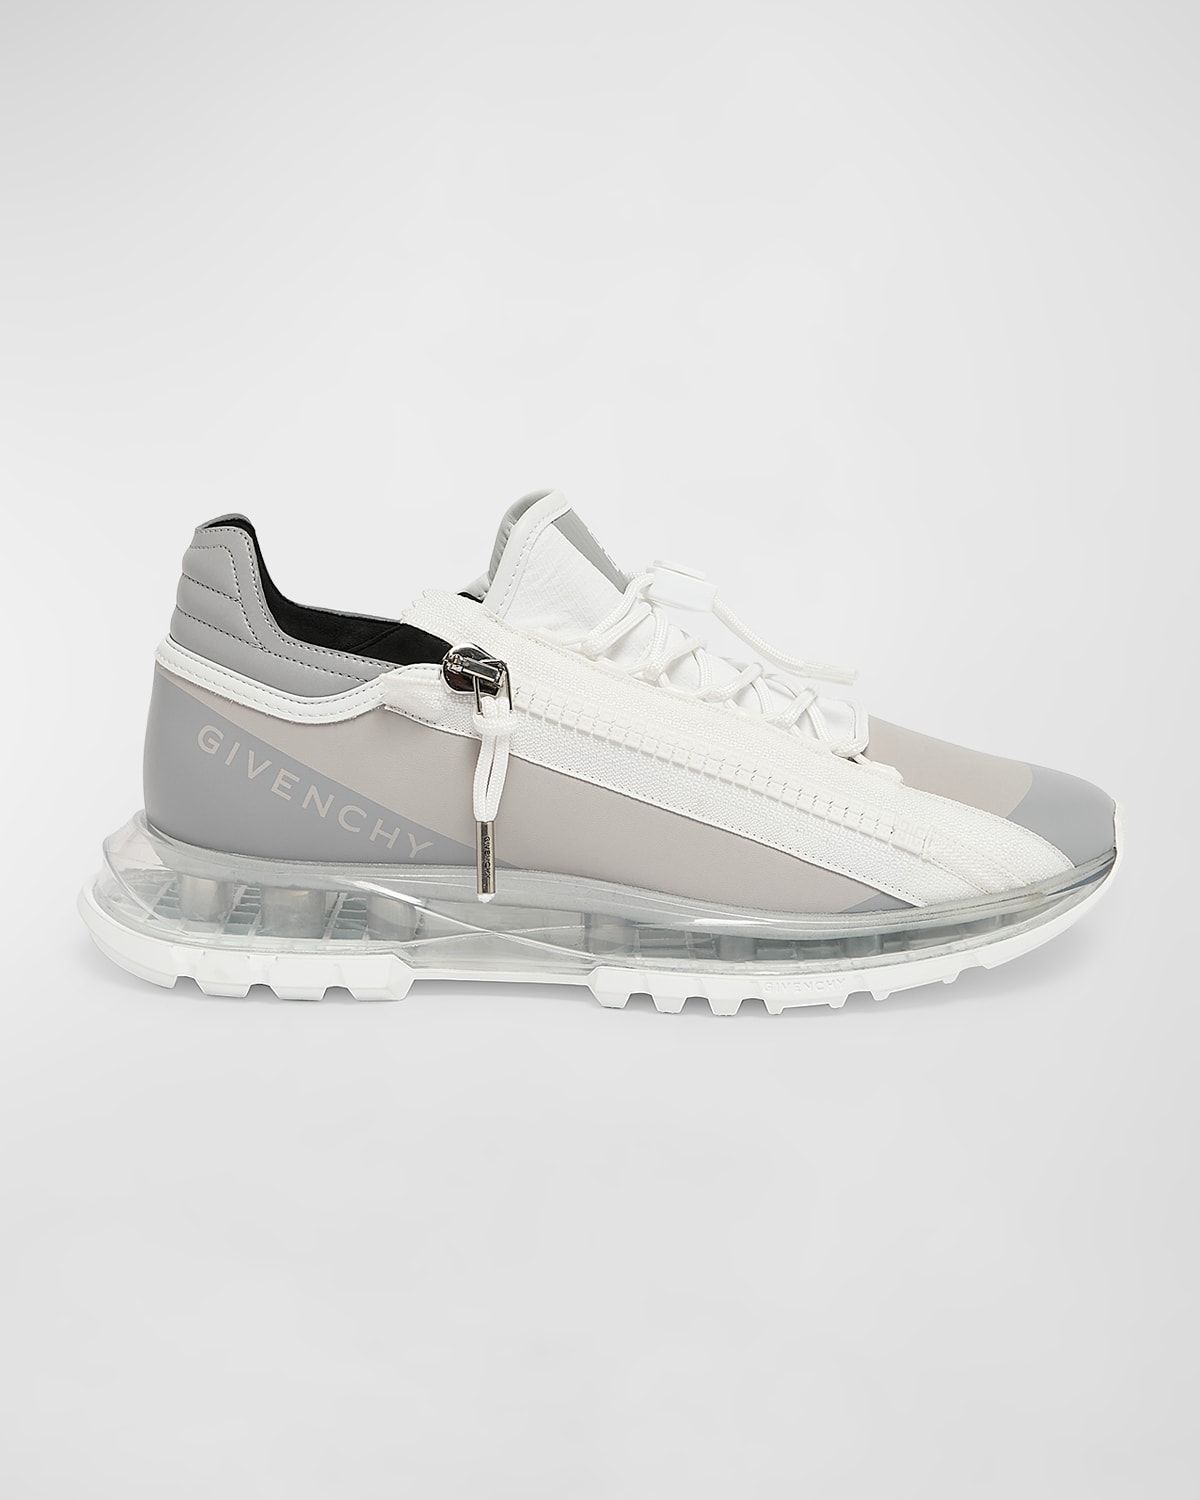 Givenchy Men's Spectre Leather Zip Runner Sneakers In Gray